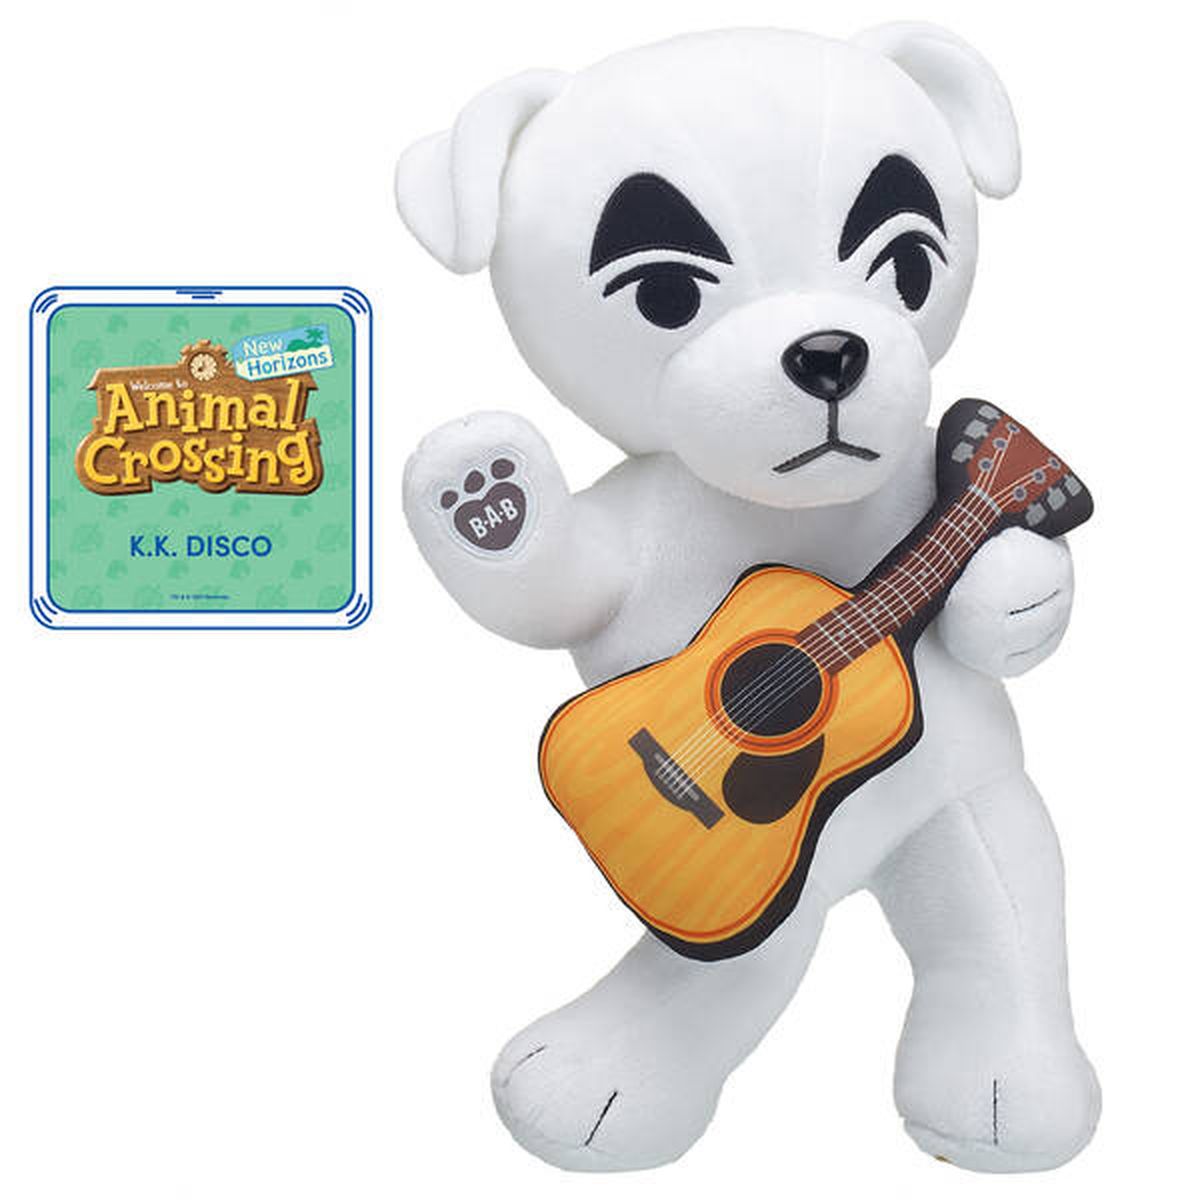 K.K. Slider stuffed animal with a guitar — naked as always.